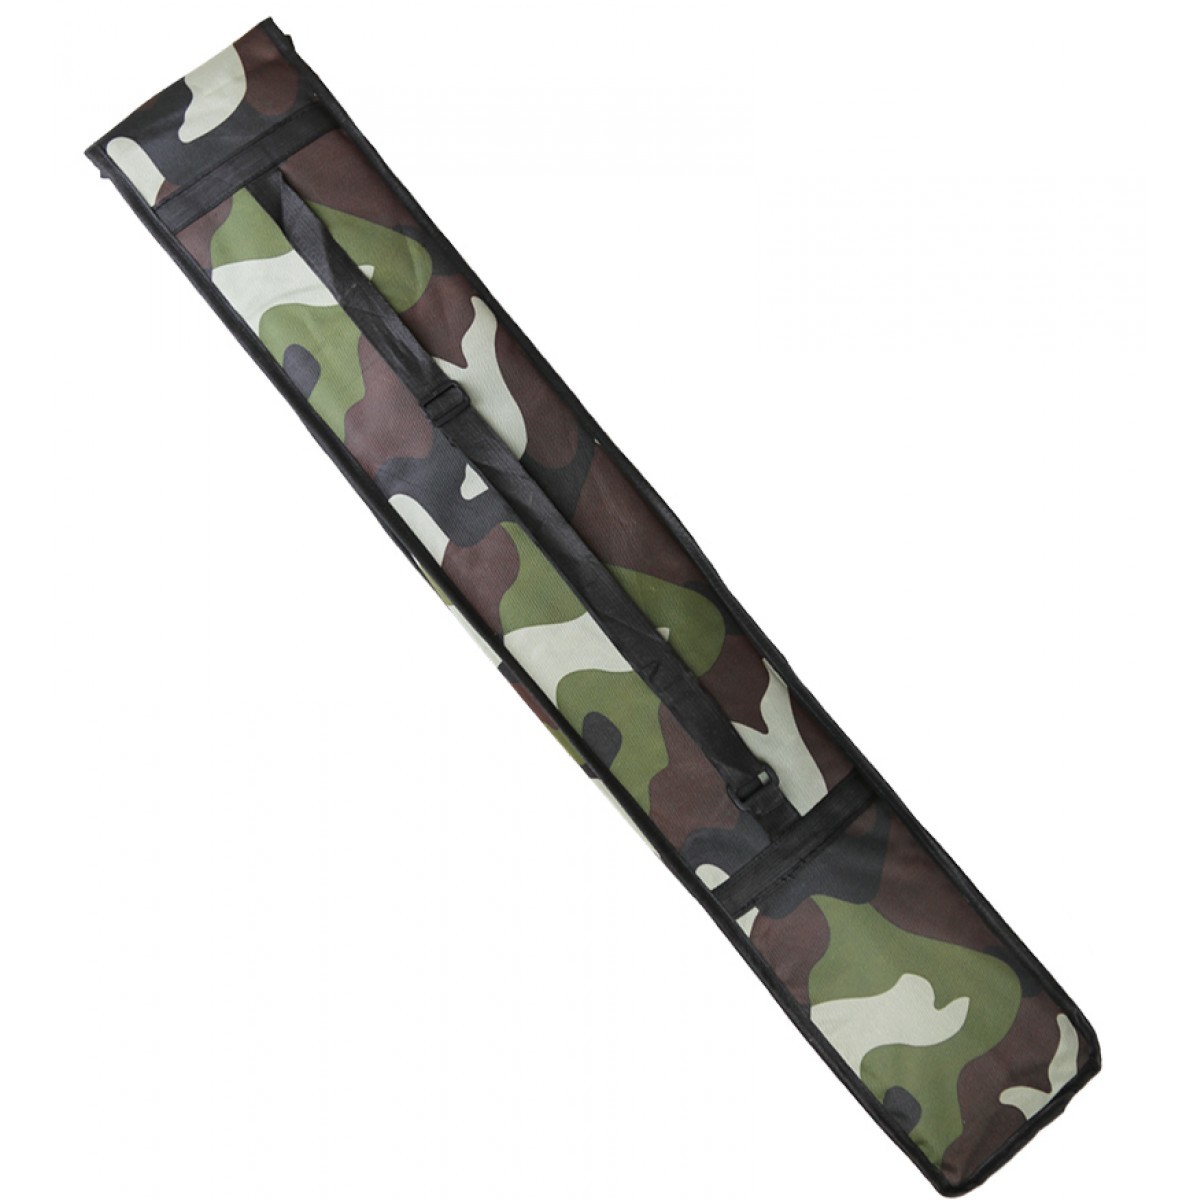 cricket bat cover padded military printed